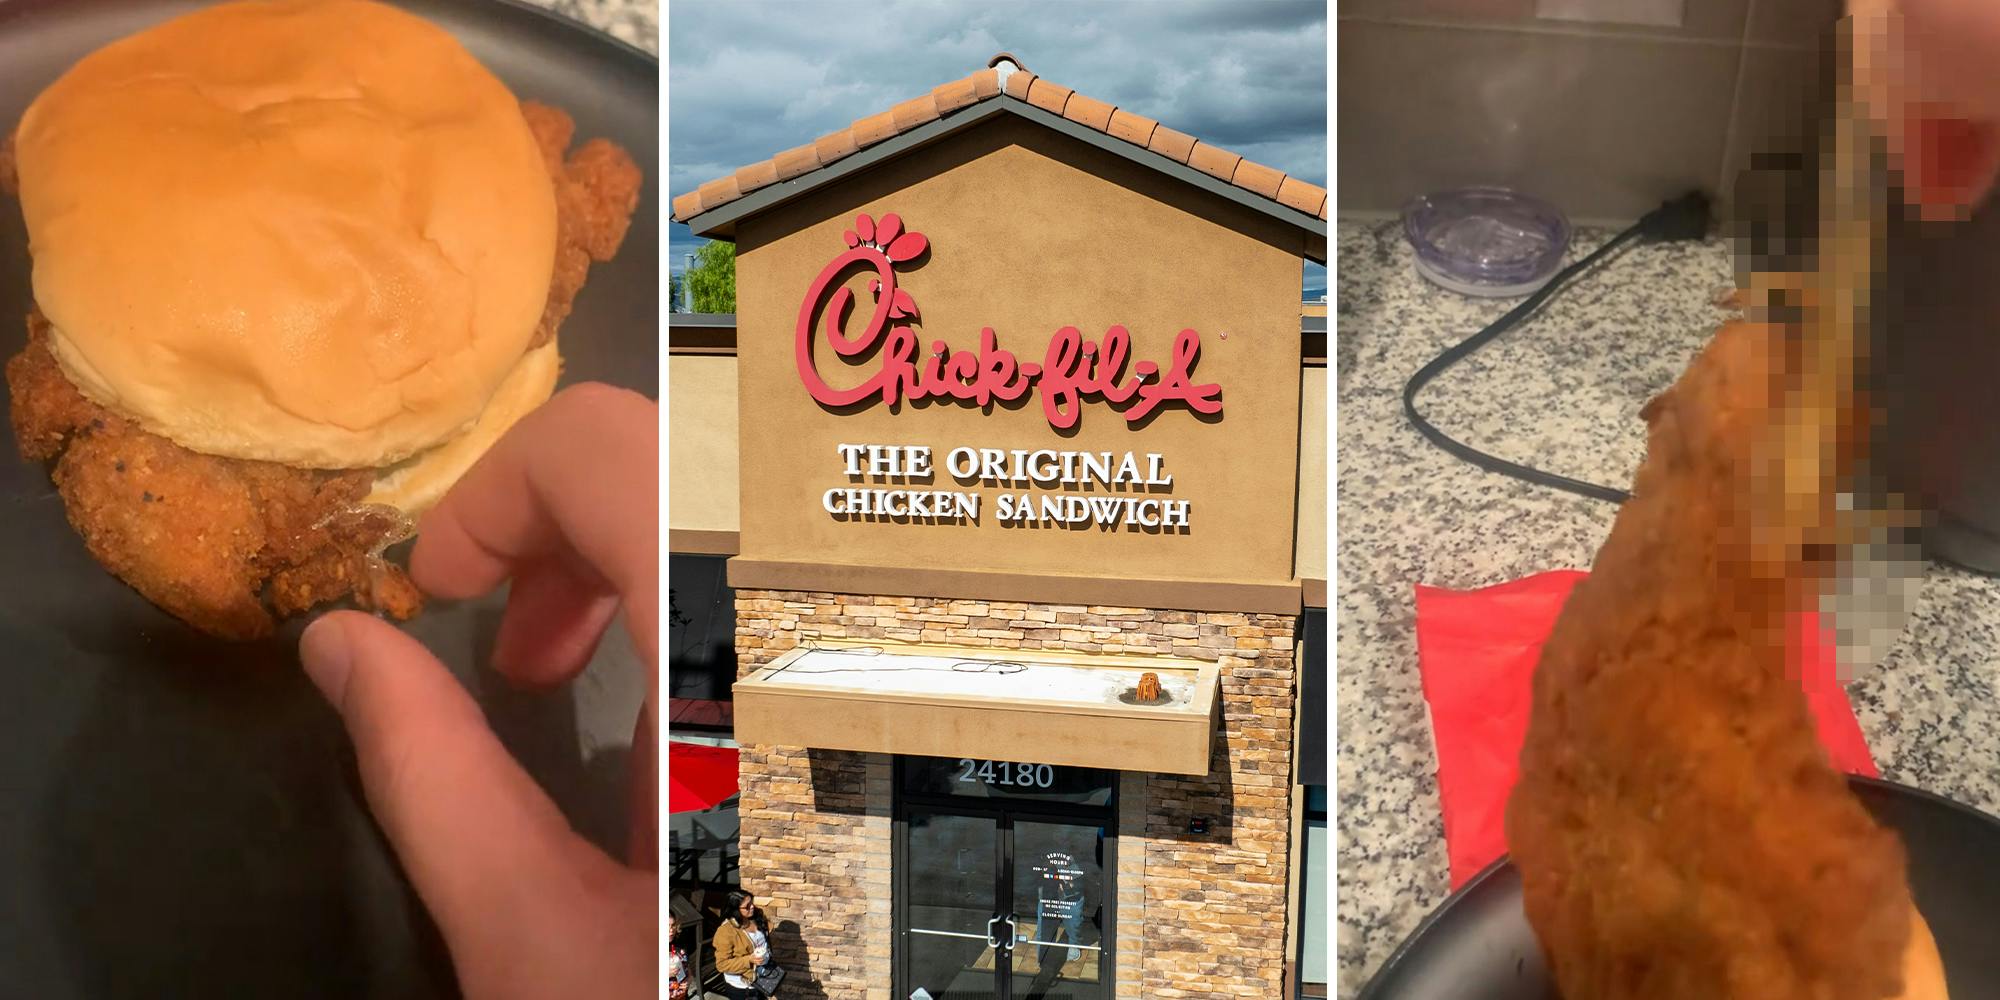 Chick-fil-A customer finds something unusual in chicken sandwich